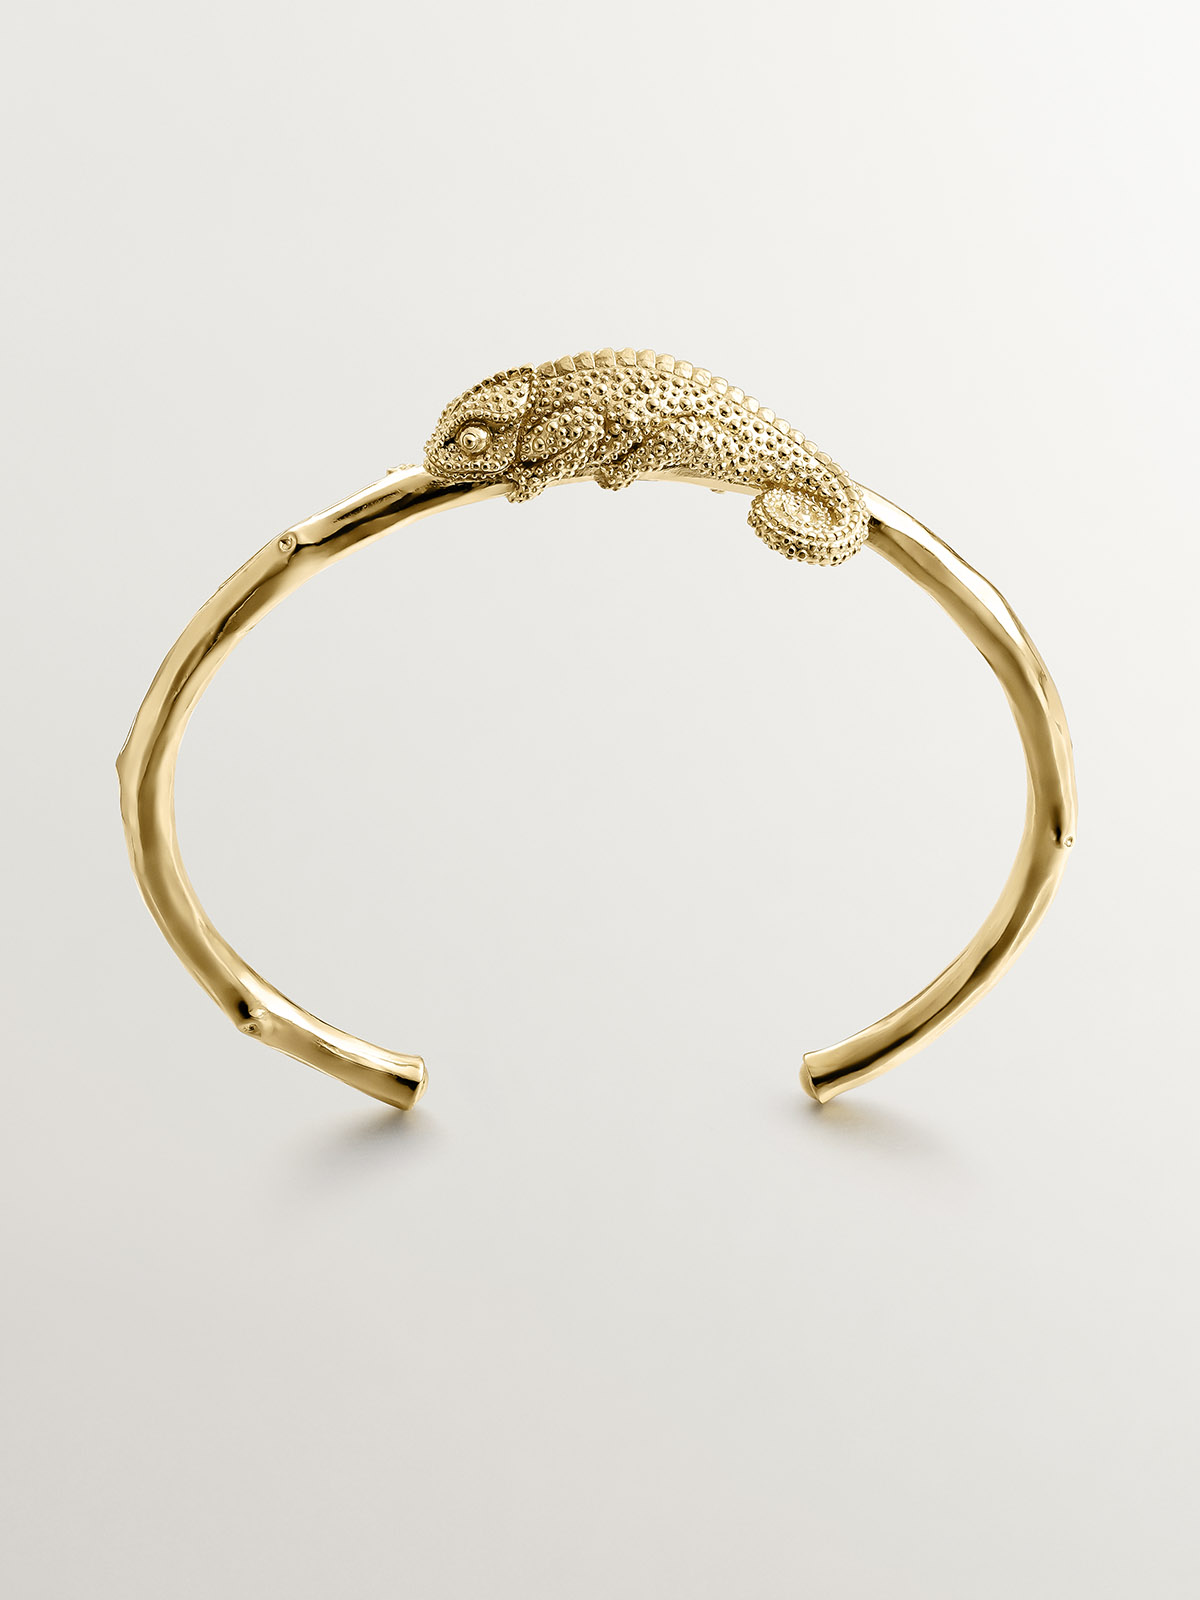 Rigid Silver Bracelet 925 Bañada in 18k yellow gold with bamboo and chameleon texture